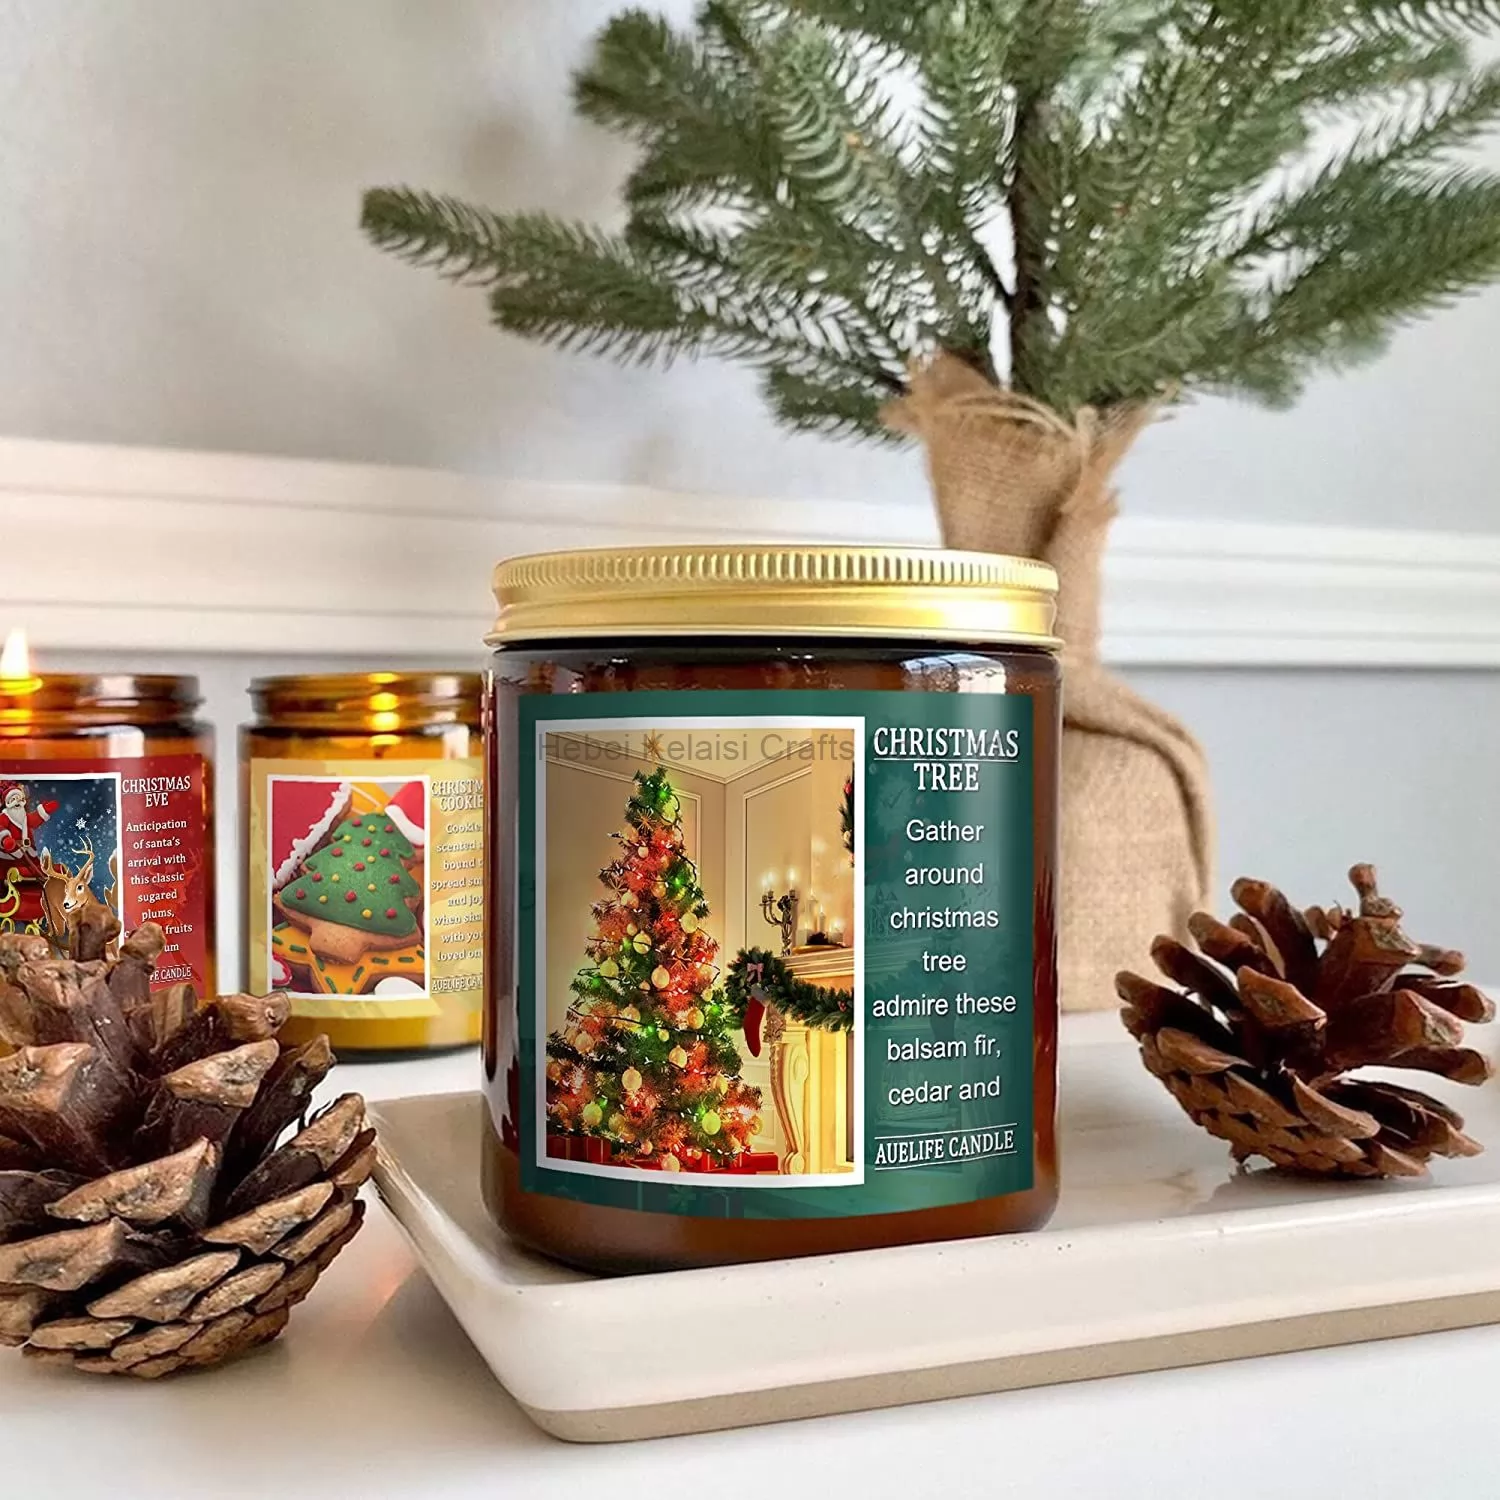 7oz Balsam Fir Cedar Holly and Evergreen Holiday Scented Candles